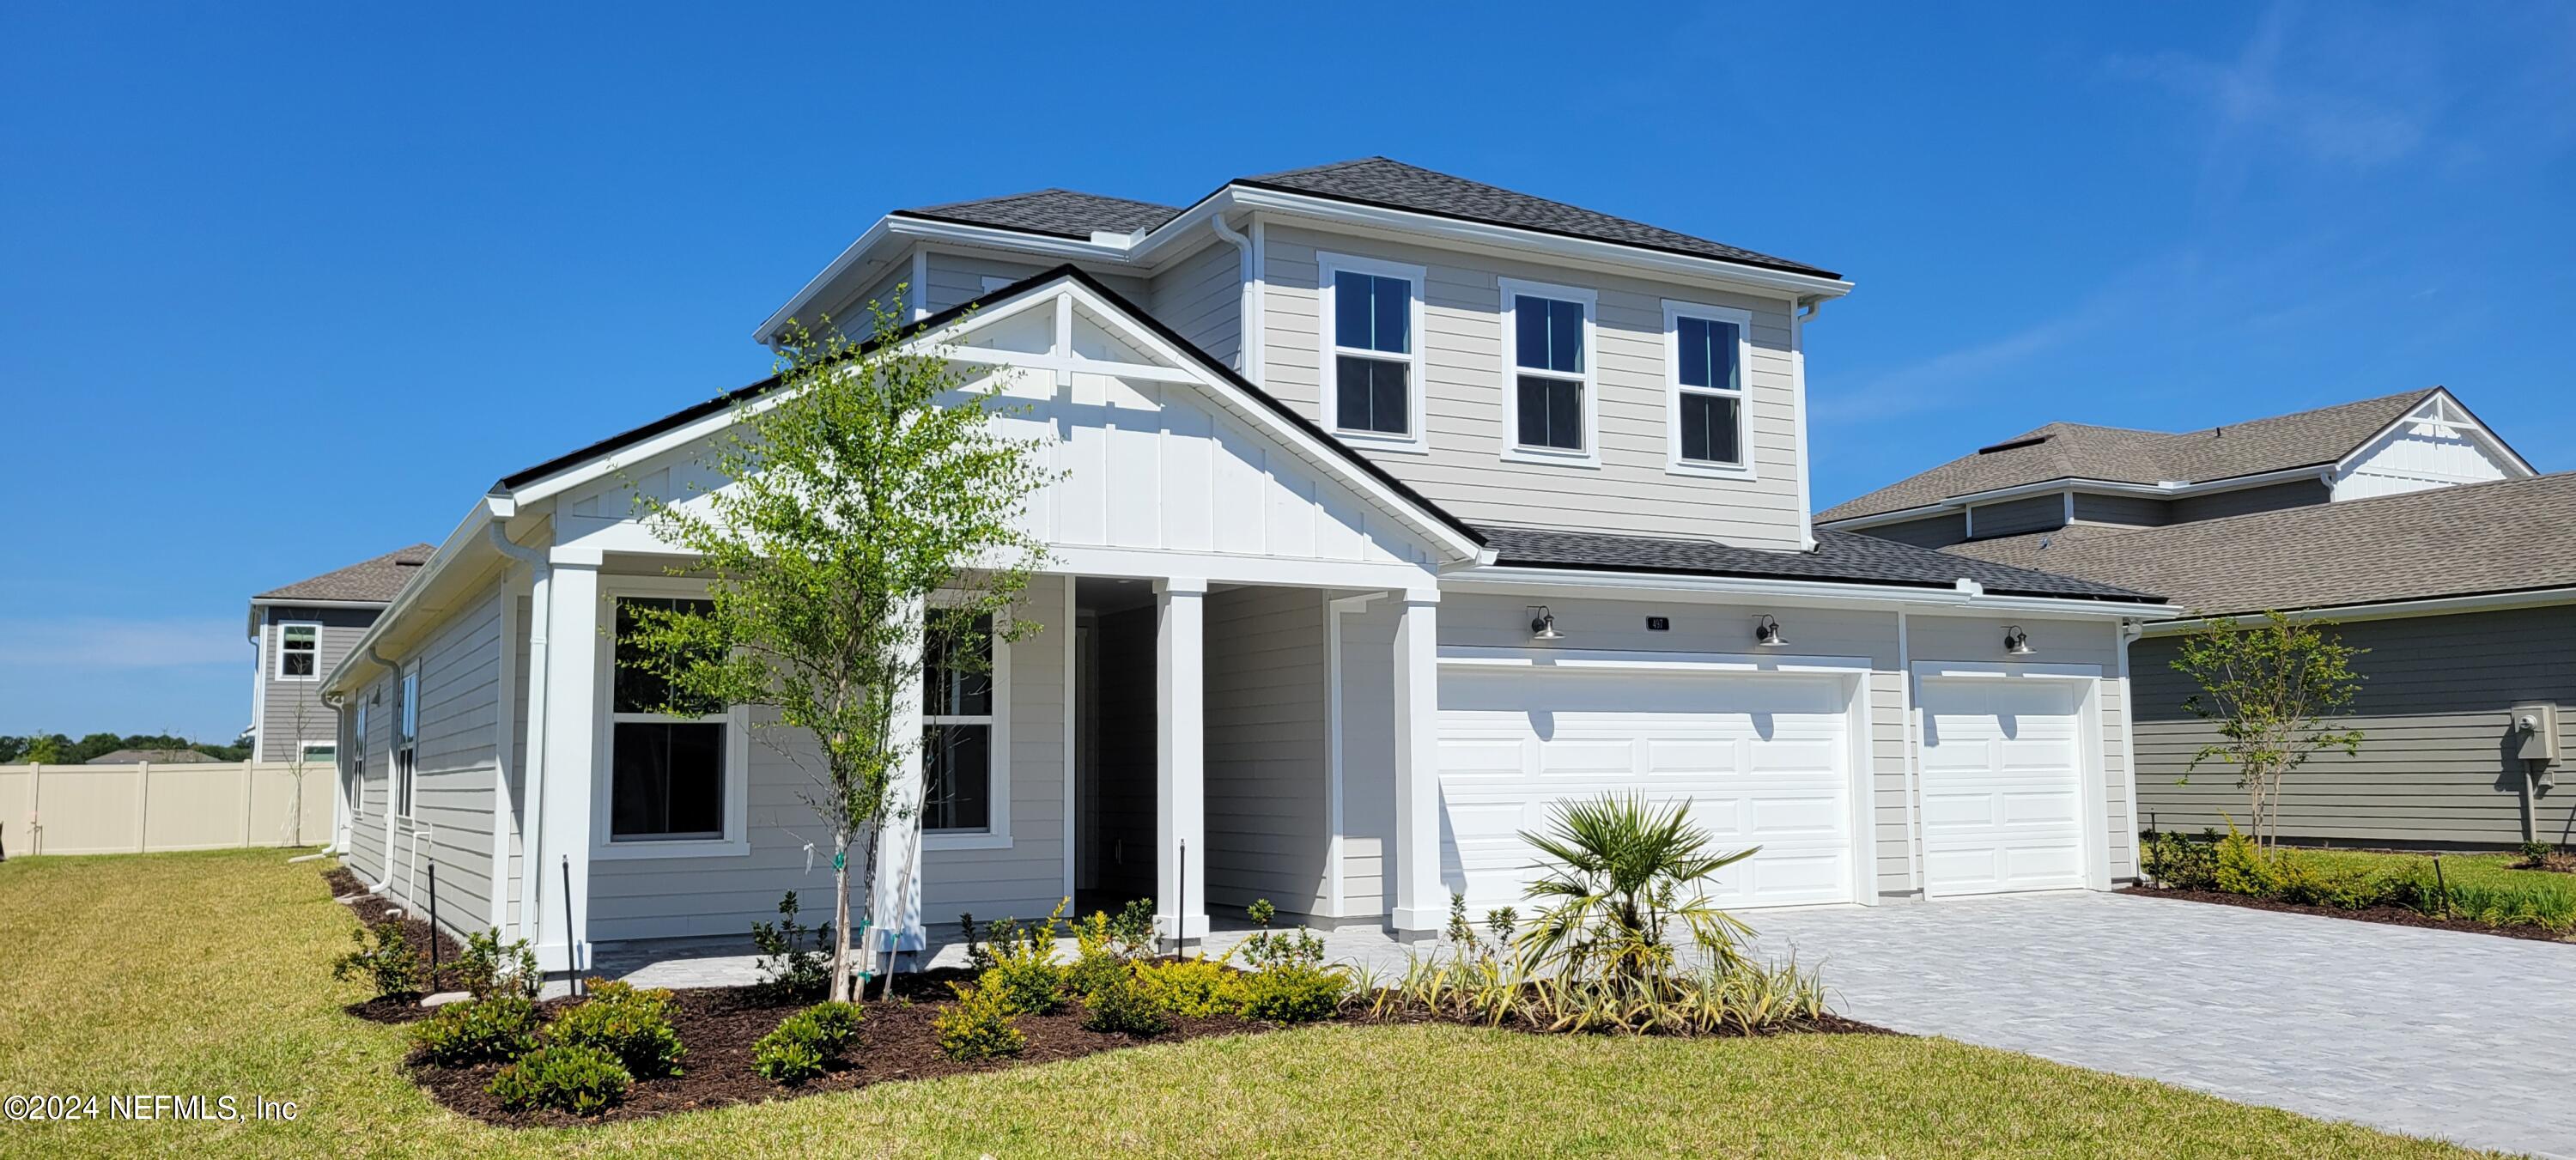 St Johns, FL home for sale located at 497 Hillendale Circle, St Johns, FL 32259